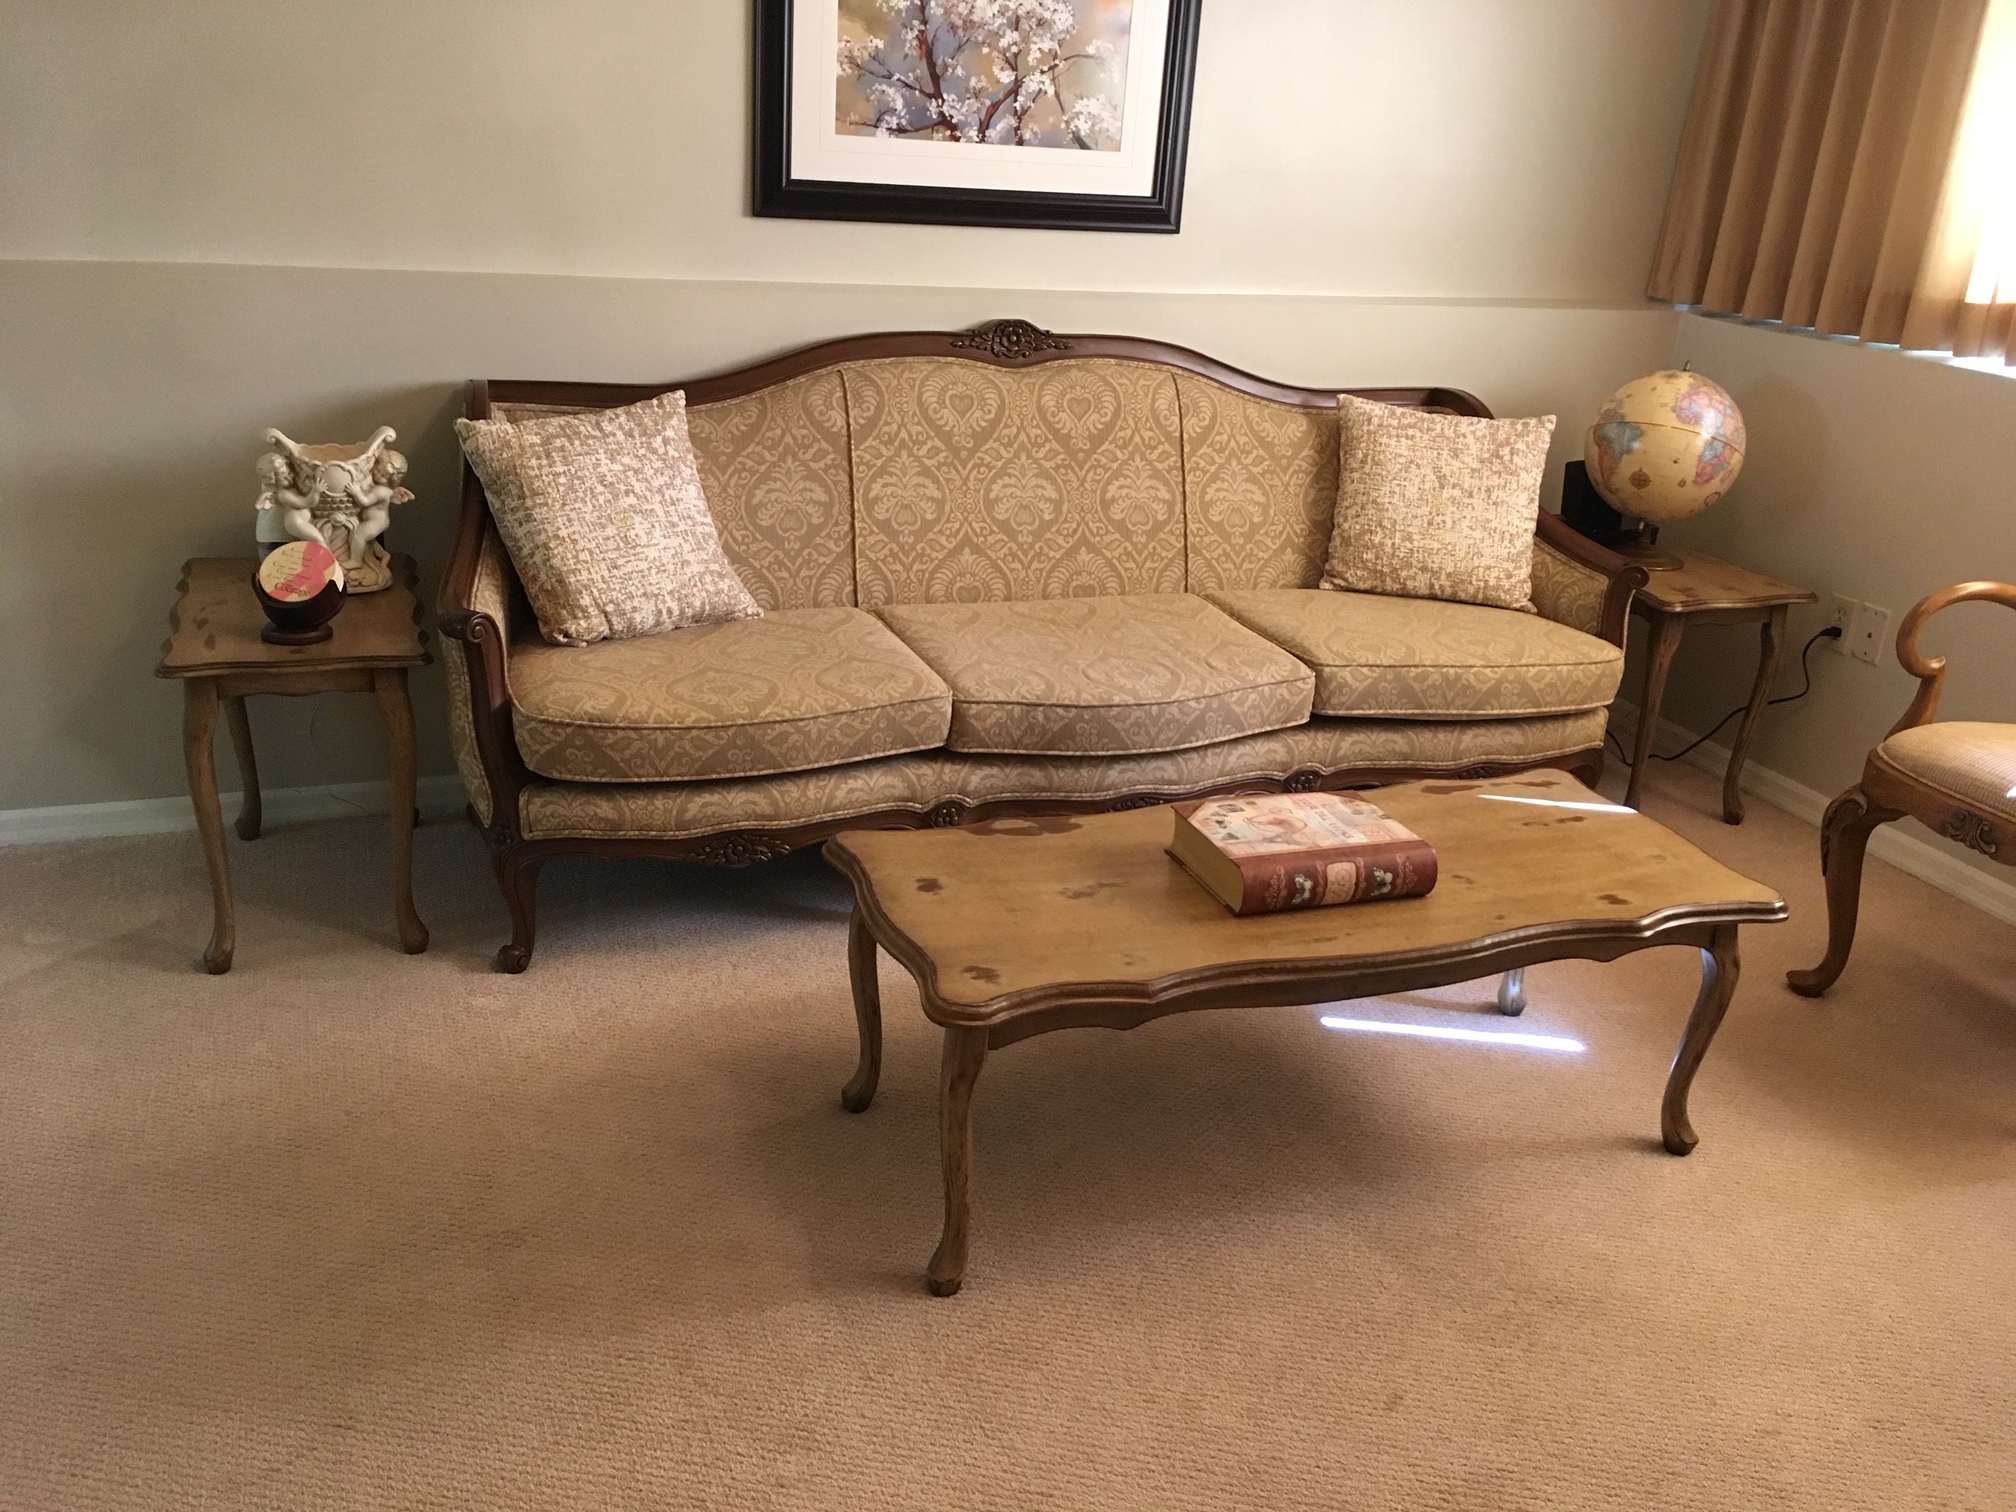 French Provincial Sofa - AM Furniture in Surrey, New Westminster, Burnaby, Vancouver, Coquitlam